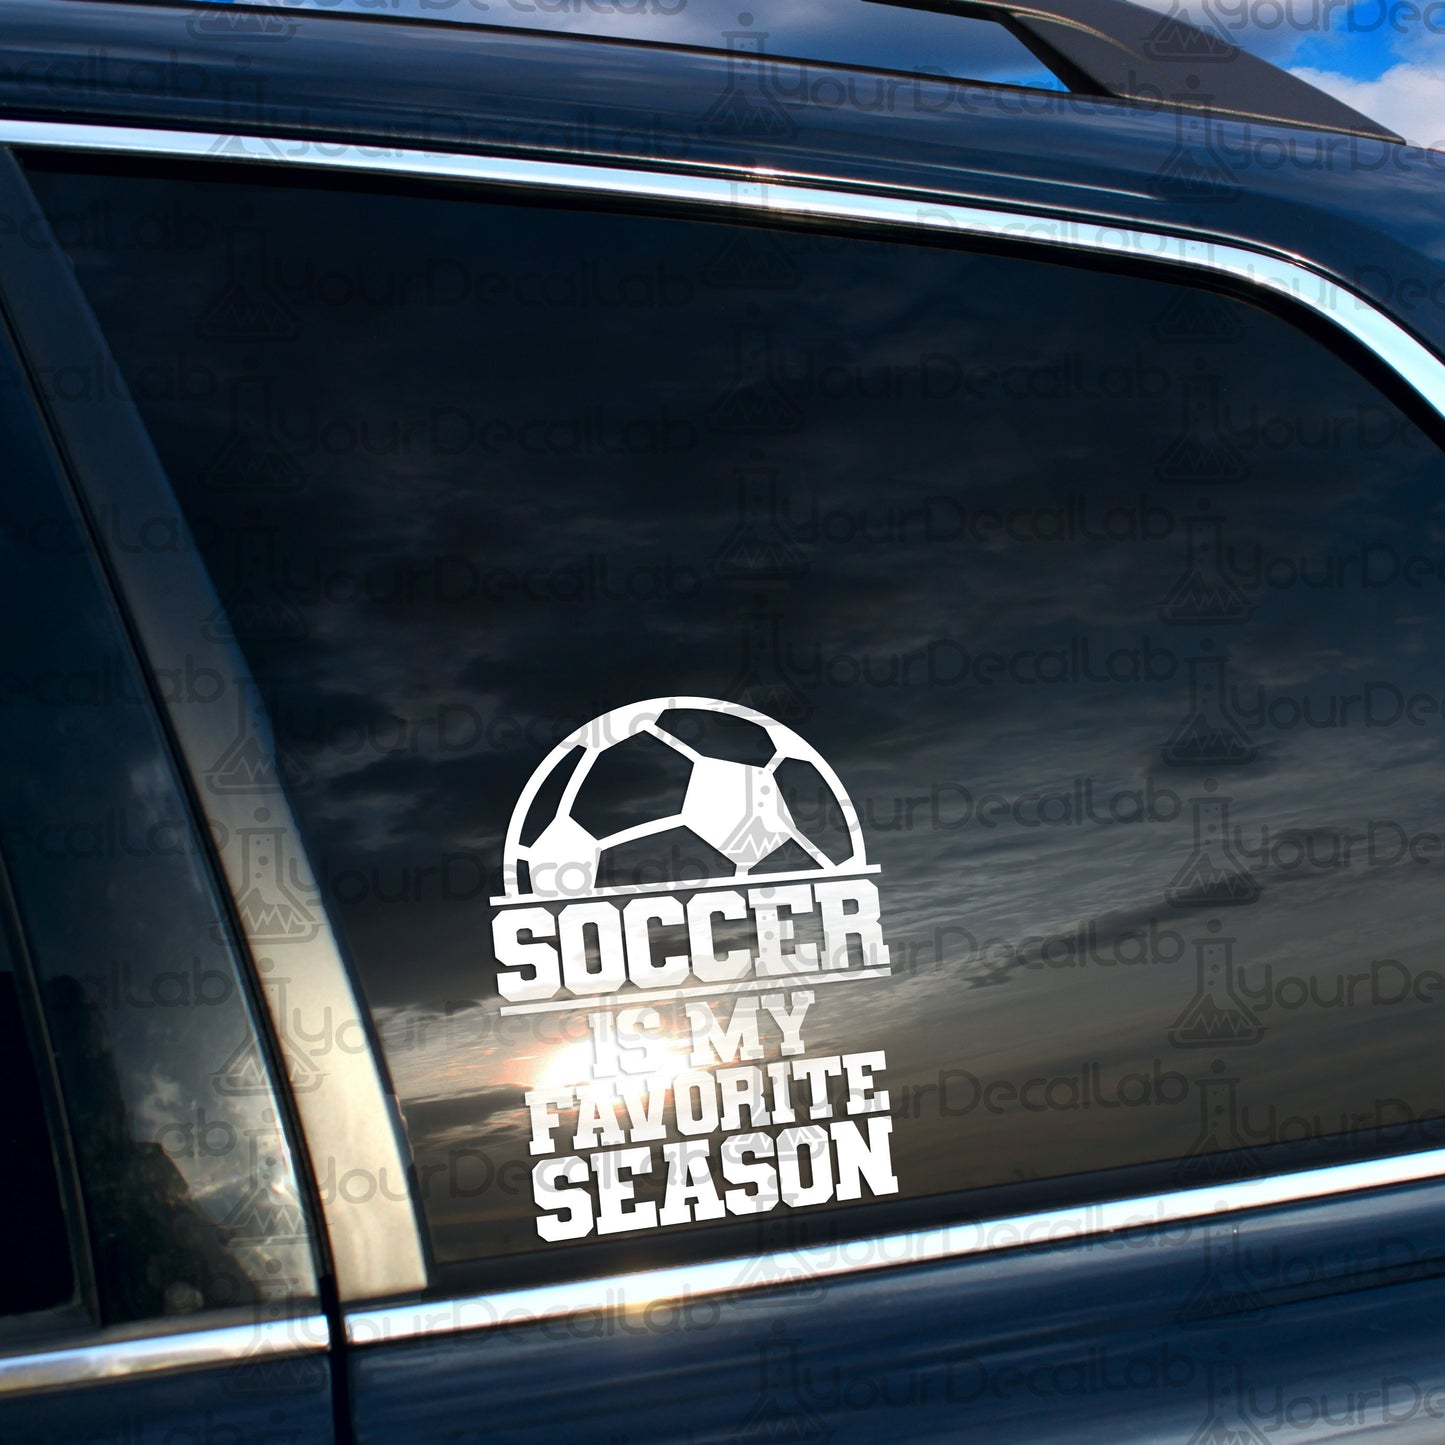 a soccer sticker on the side of a car